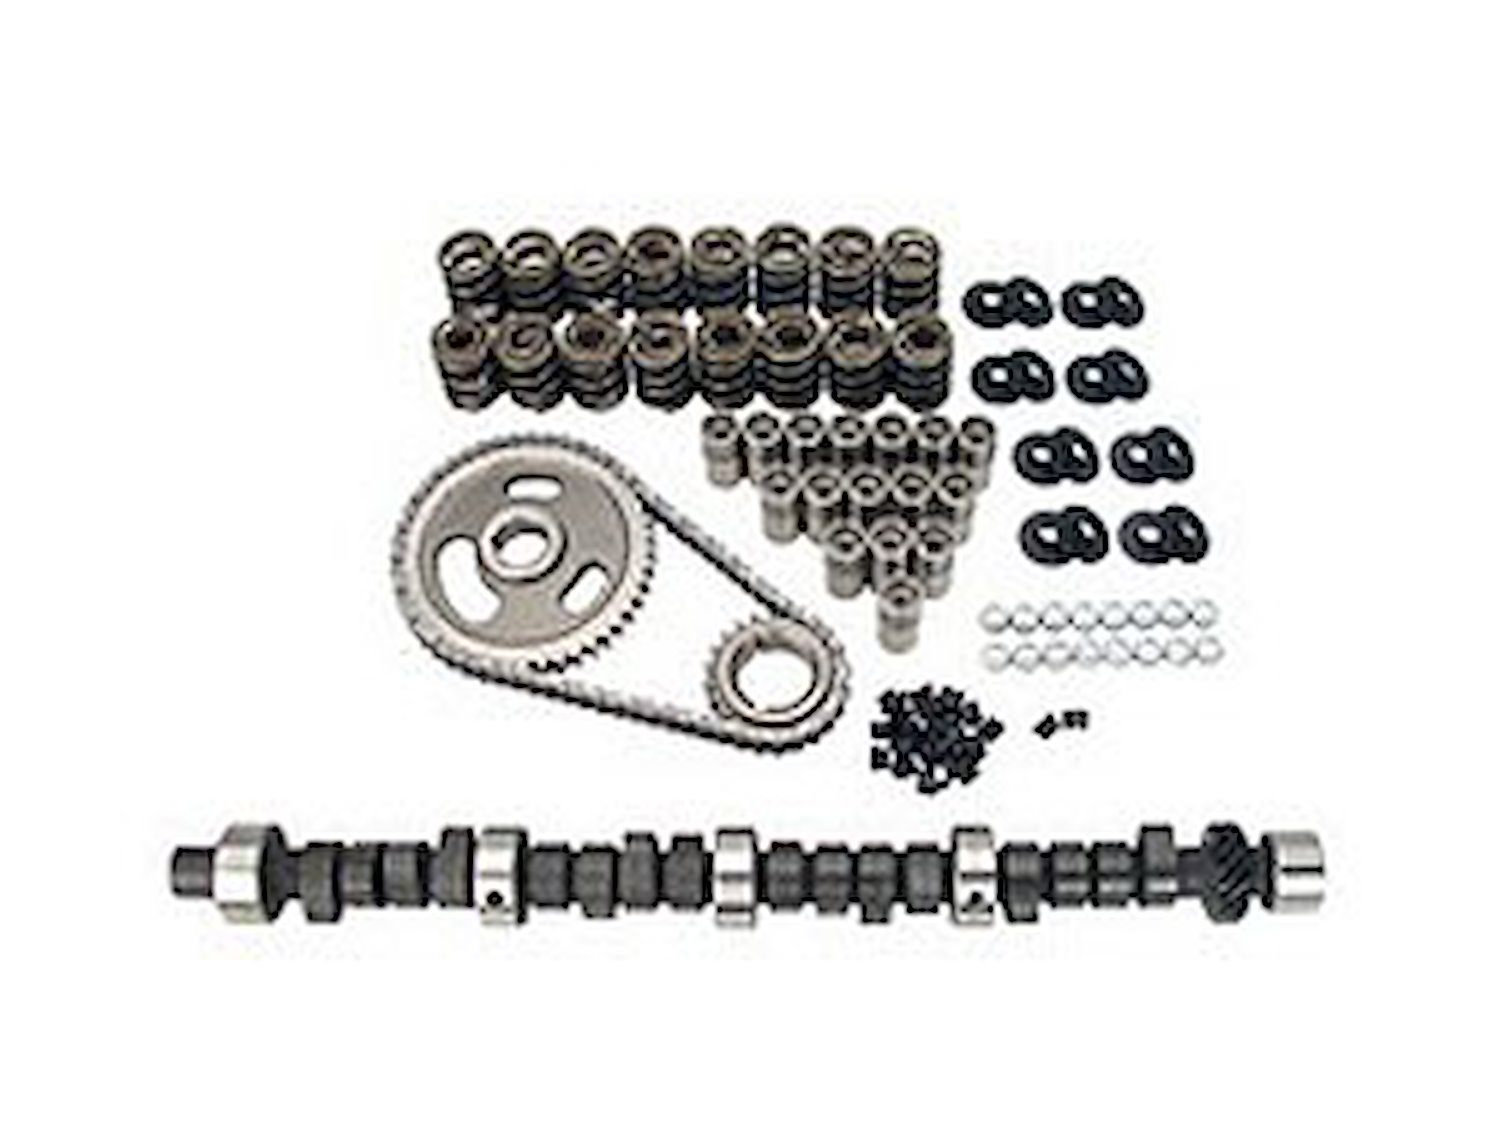 High Energy 268H Hydraulic Flat Tappet Camshaft Complete Kit Lift .454"/.454" Duration 268/268 RPM Range 1500-5500